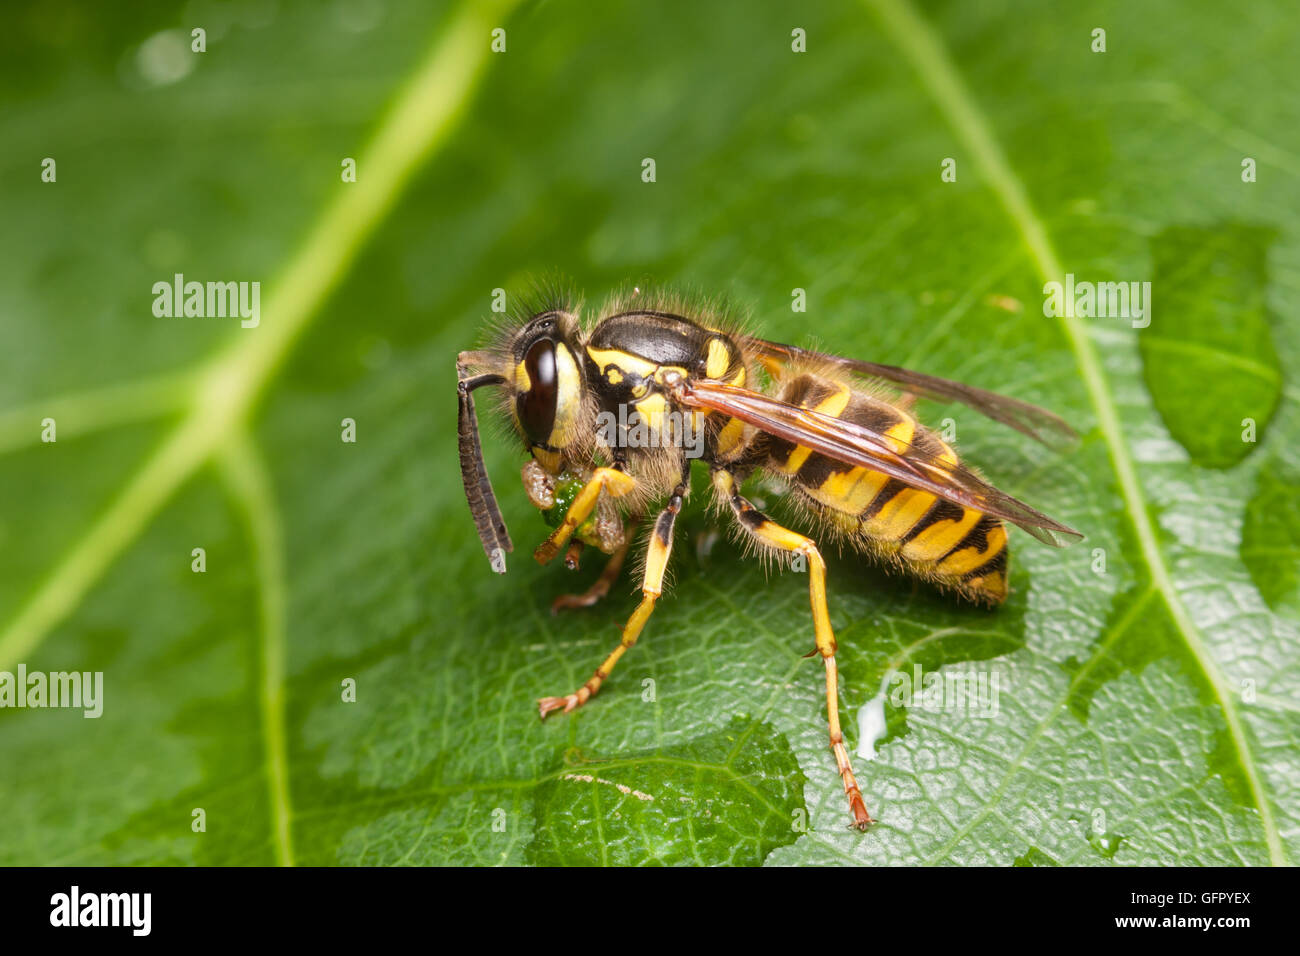 A female Downy Yellowjacket (Vespula flavopilosa) eats her caught prey while perching on a leaf. Stock Photo